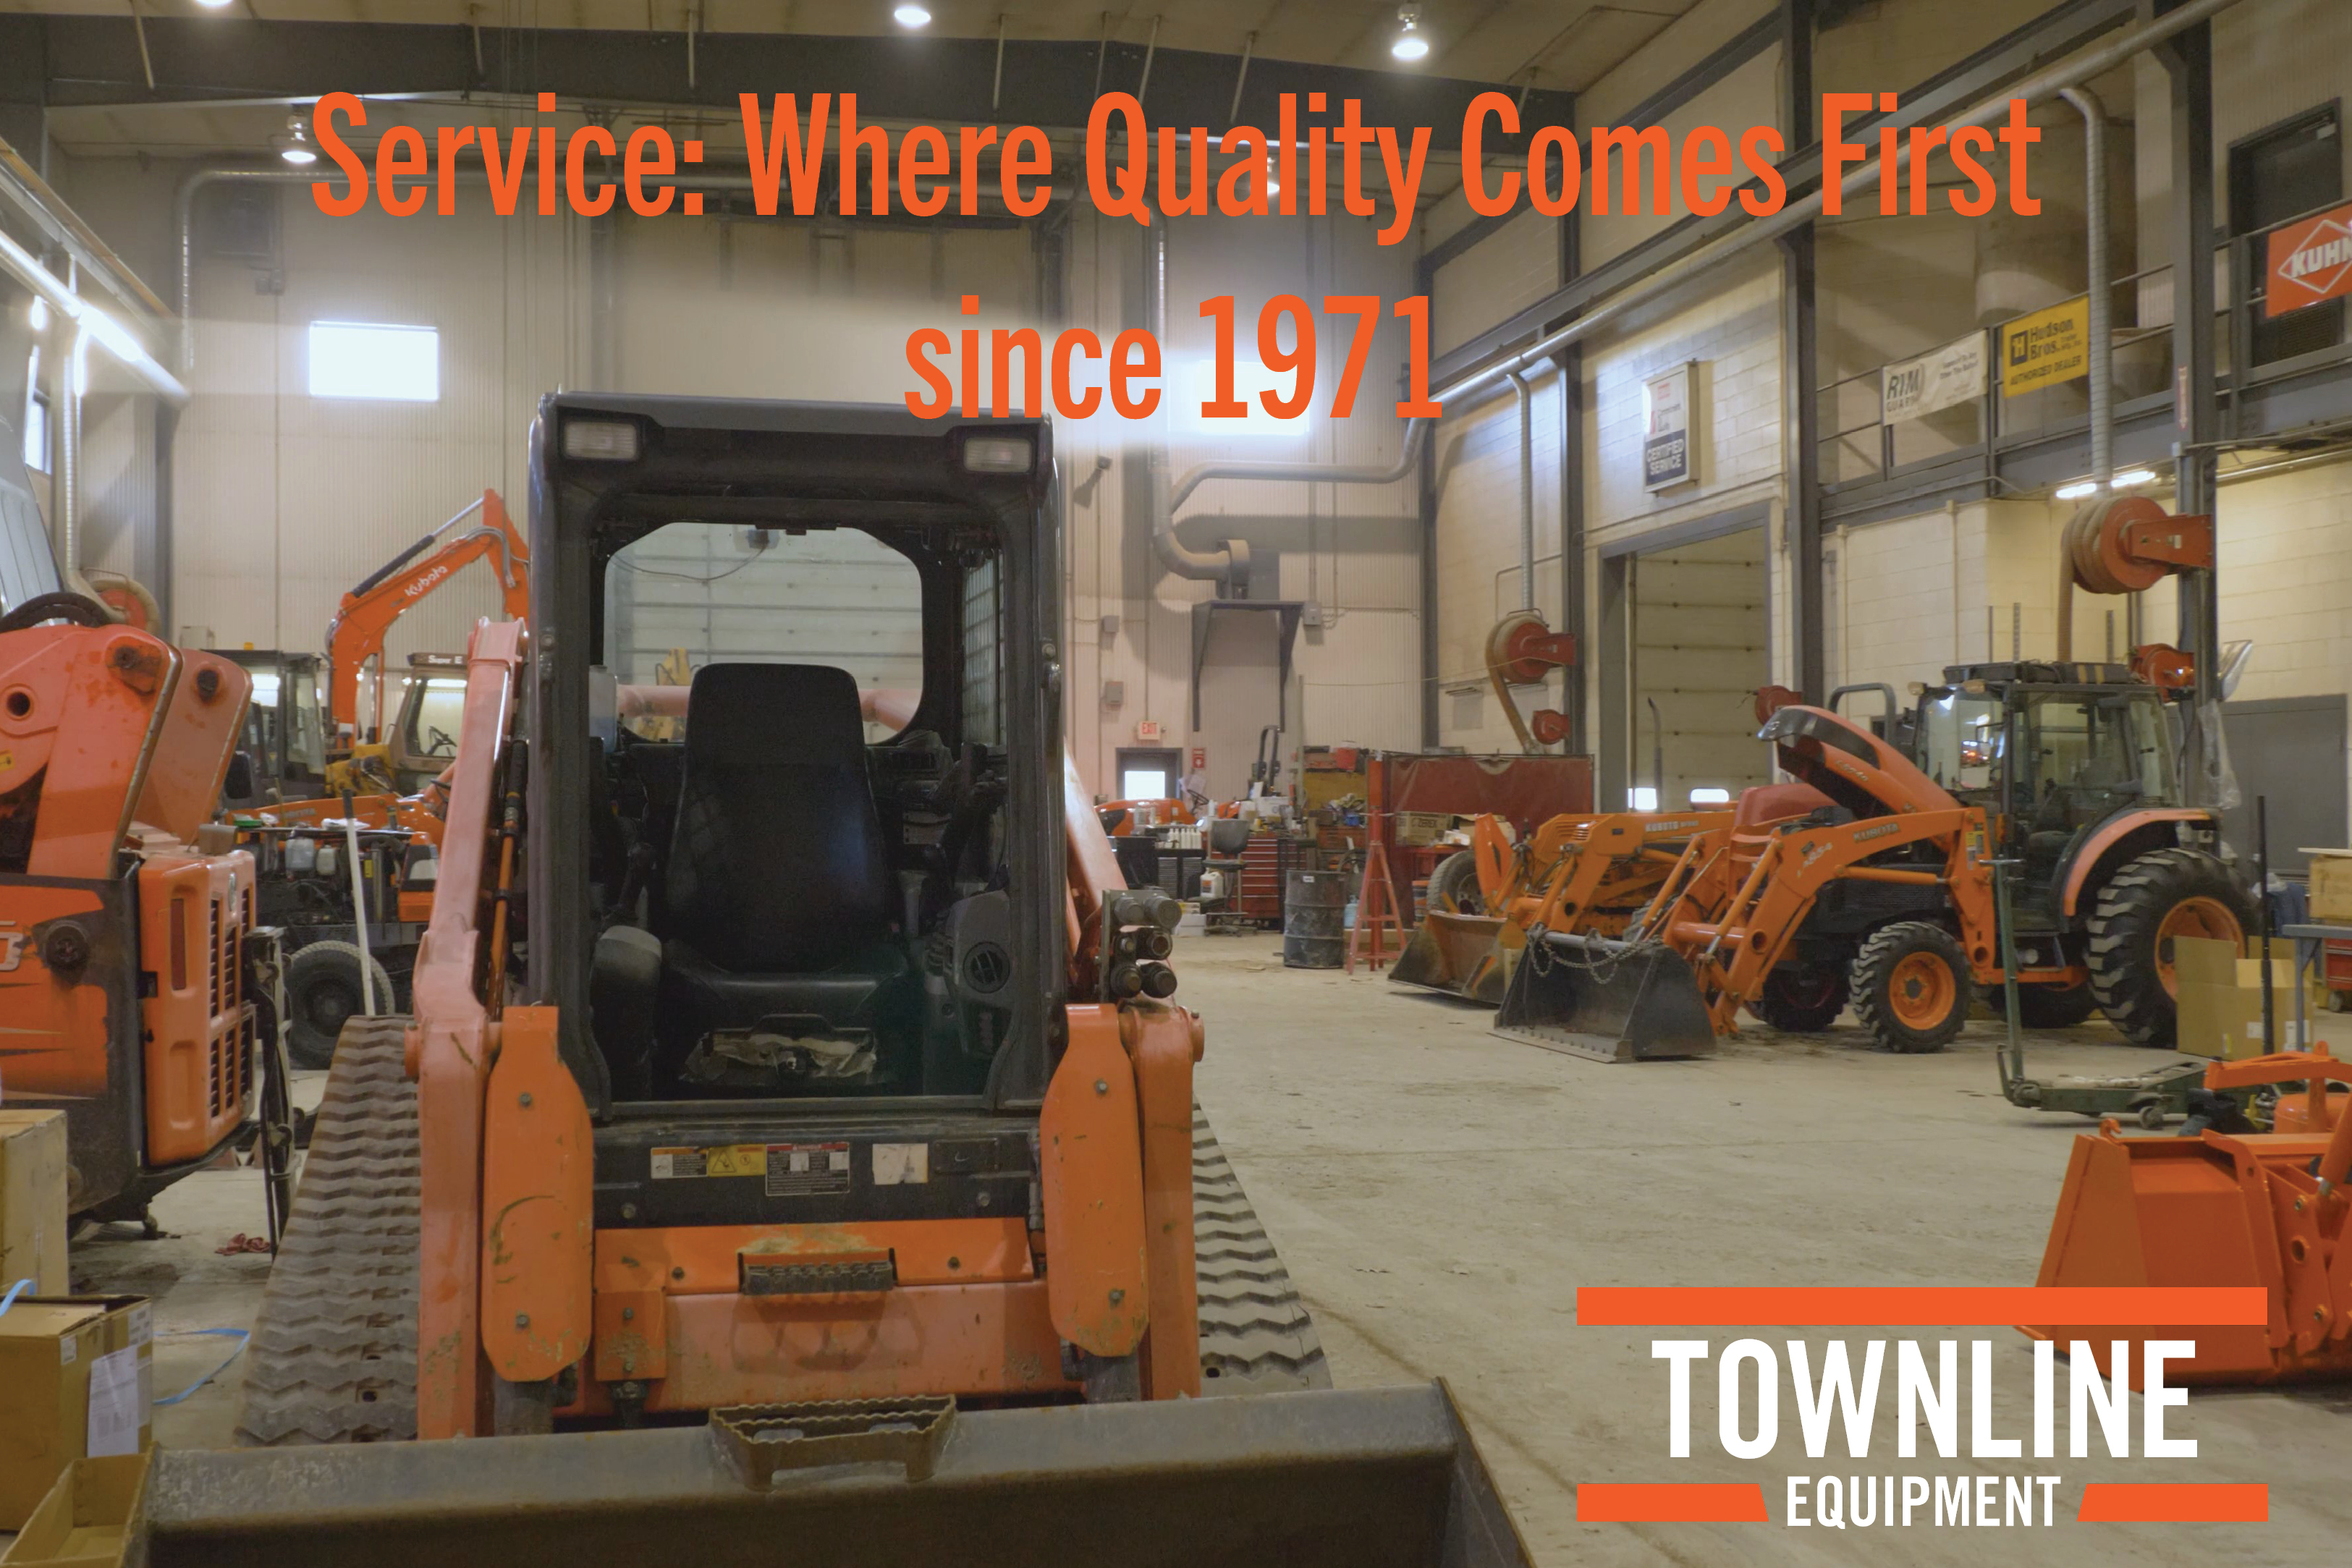 Townline Equipment, Where Quality Comes First